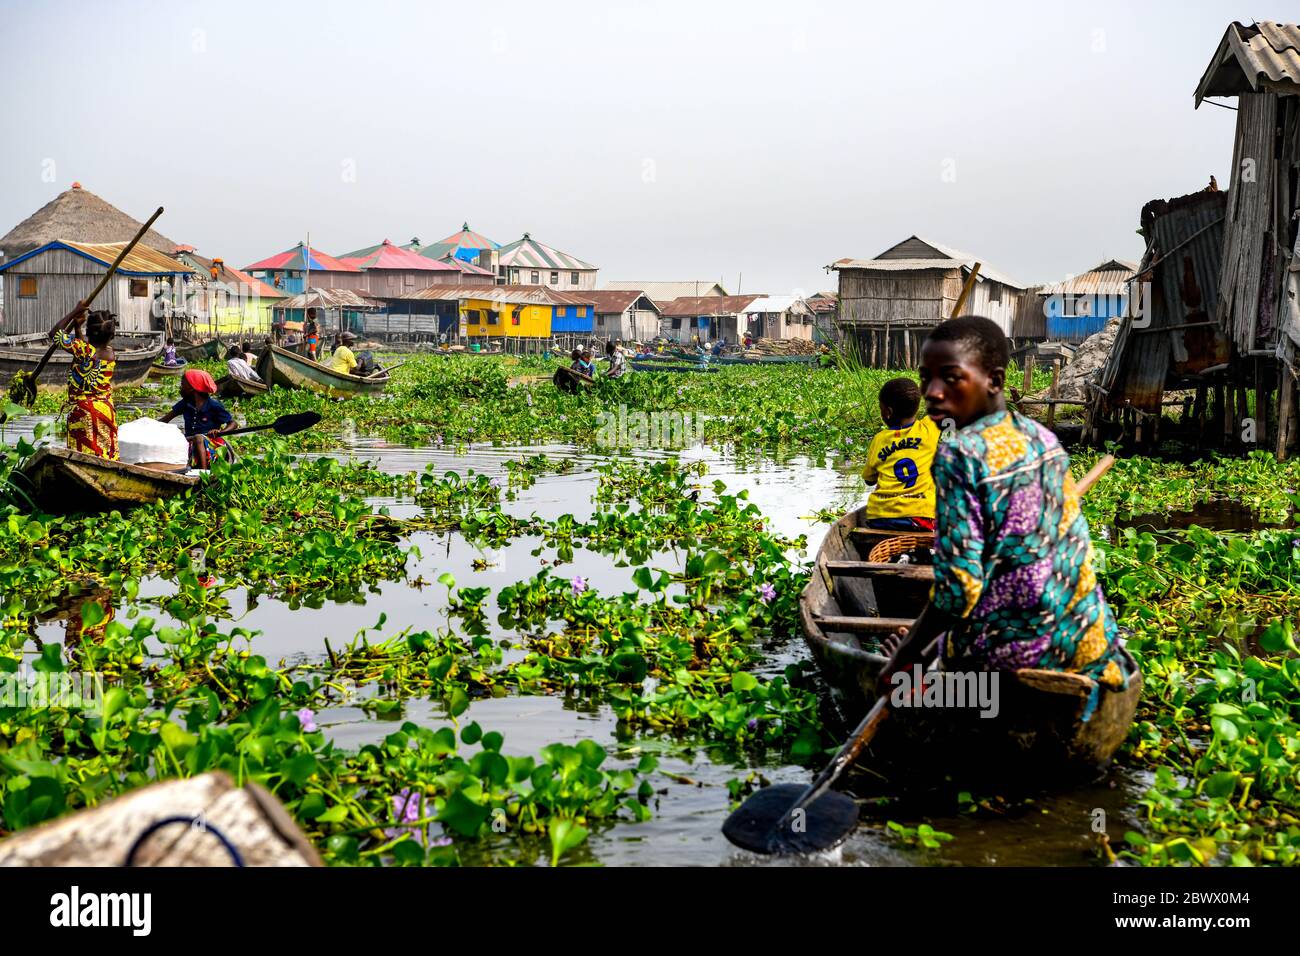 Africa, West Africa, Benin, Lake Nokoue, Ganvié. Pirogues in the water streets of the lakeside town of Ganvié. Stock Photo